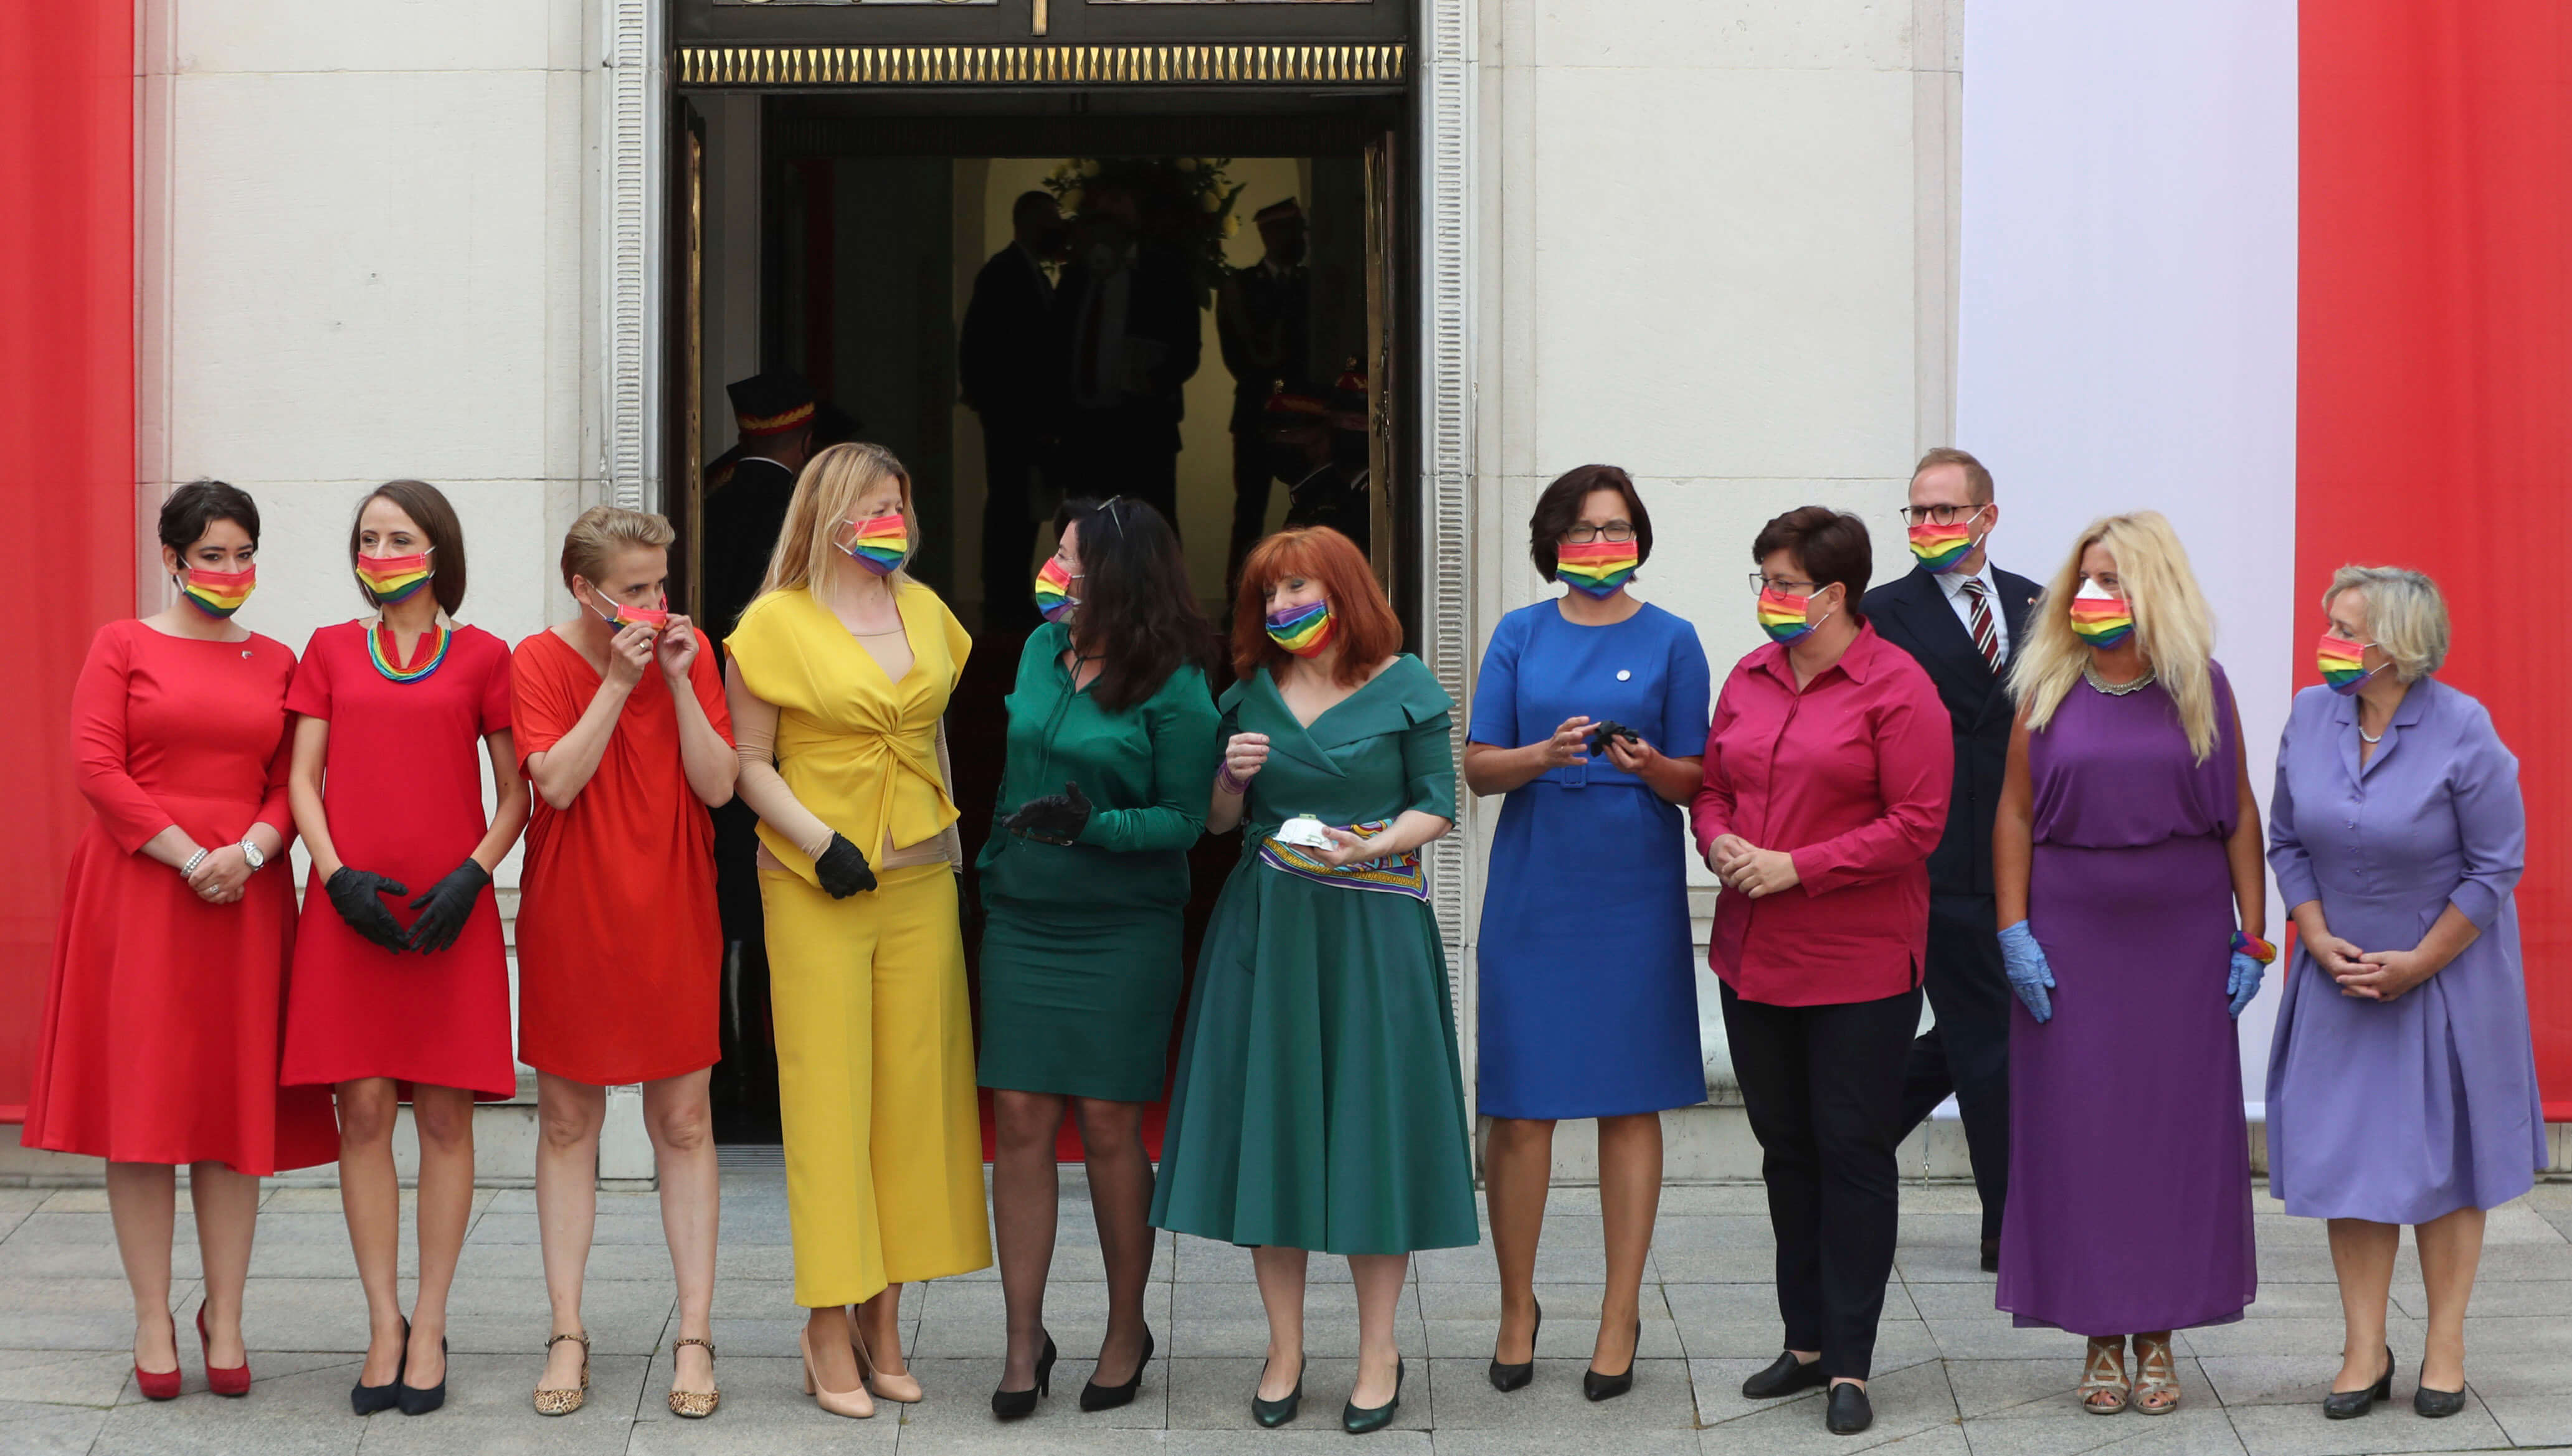 Poland's left-wing lawmakers dressed in rainbow colours to show support for the LGBTQ community outside the parliament building ahead of the swearing in ceremony of President Andrzej Duda for a second term.